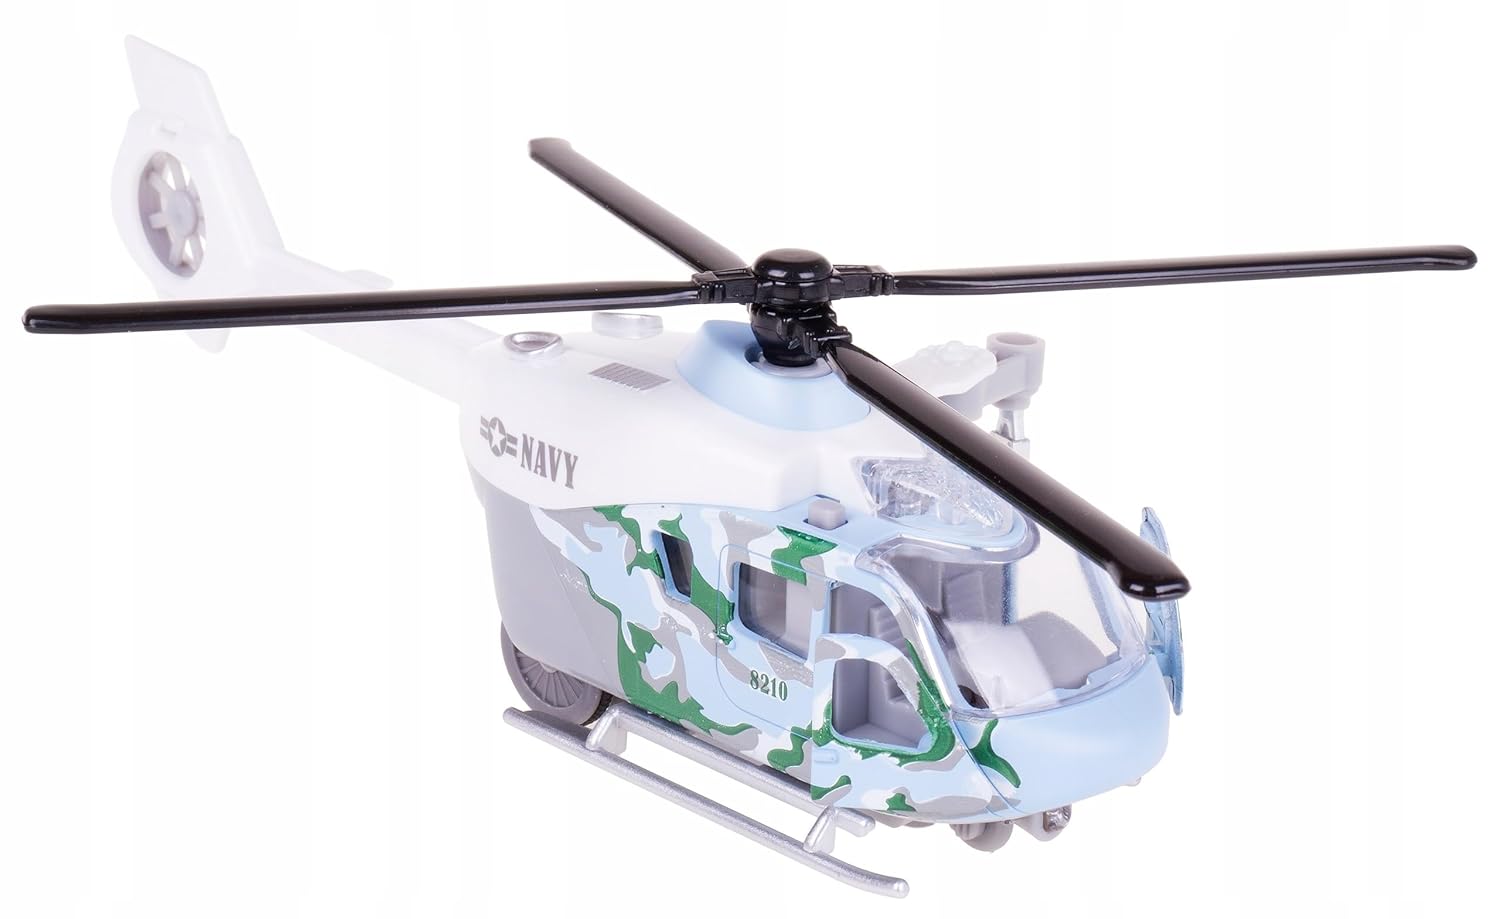 King Smart Toy Helicopter For Kids Navy Print